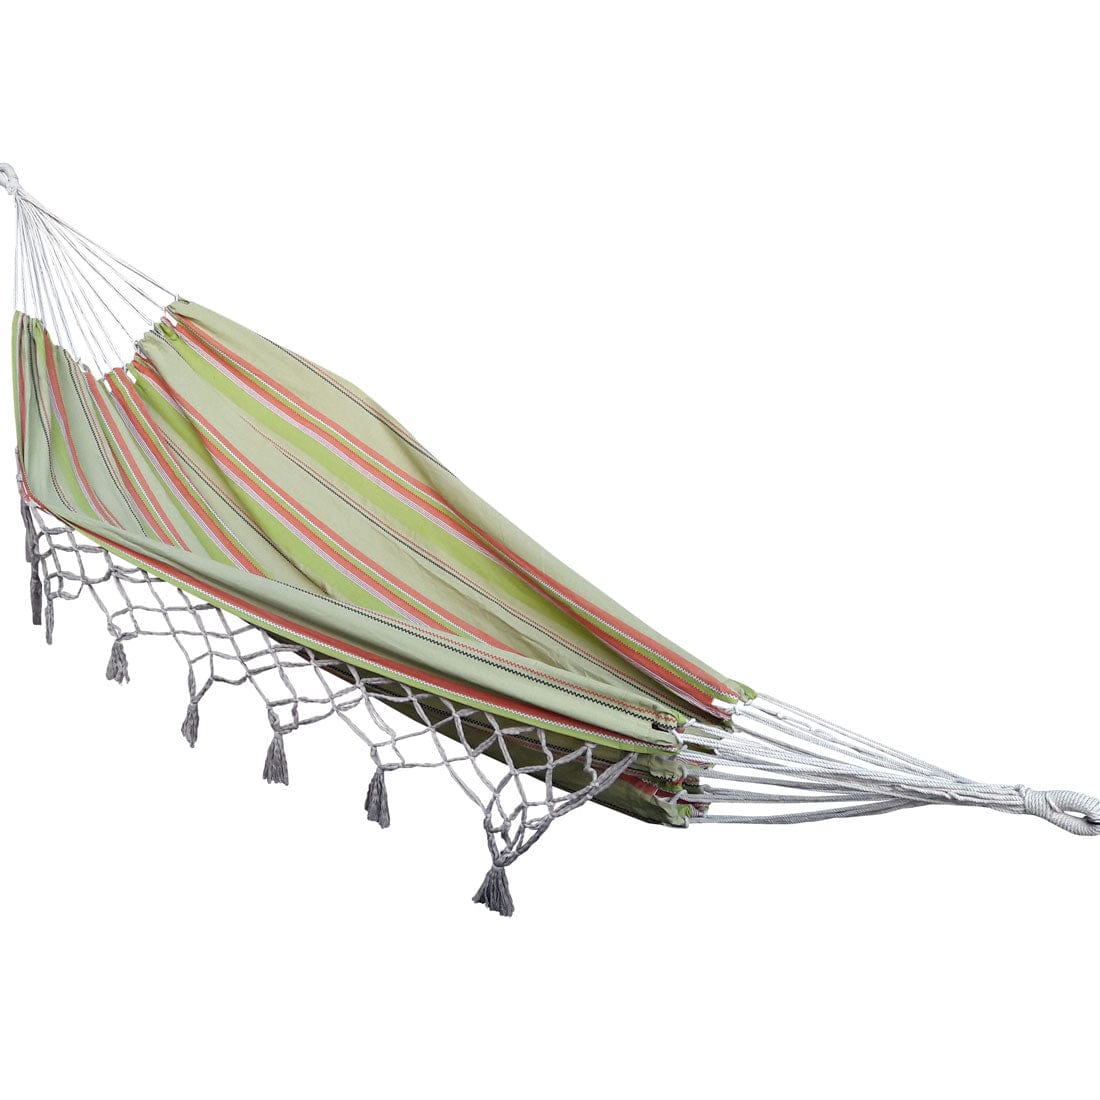 Extra Large Classic Canvas Hammock With Deco Fringes, Weight Capacity 180kg- 140W X 396L cm